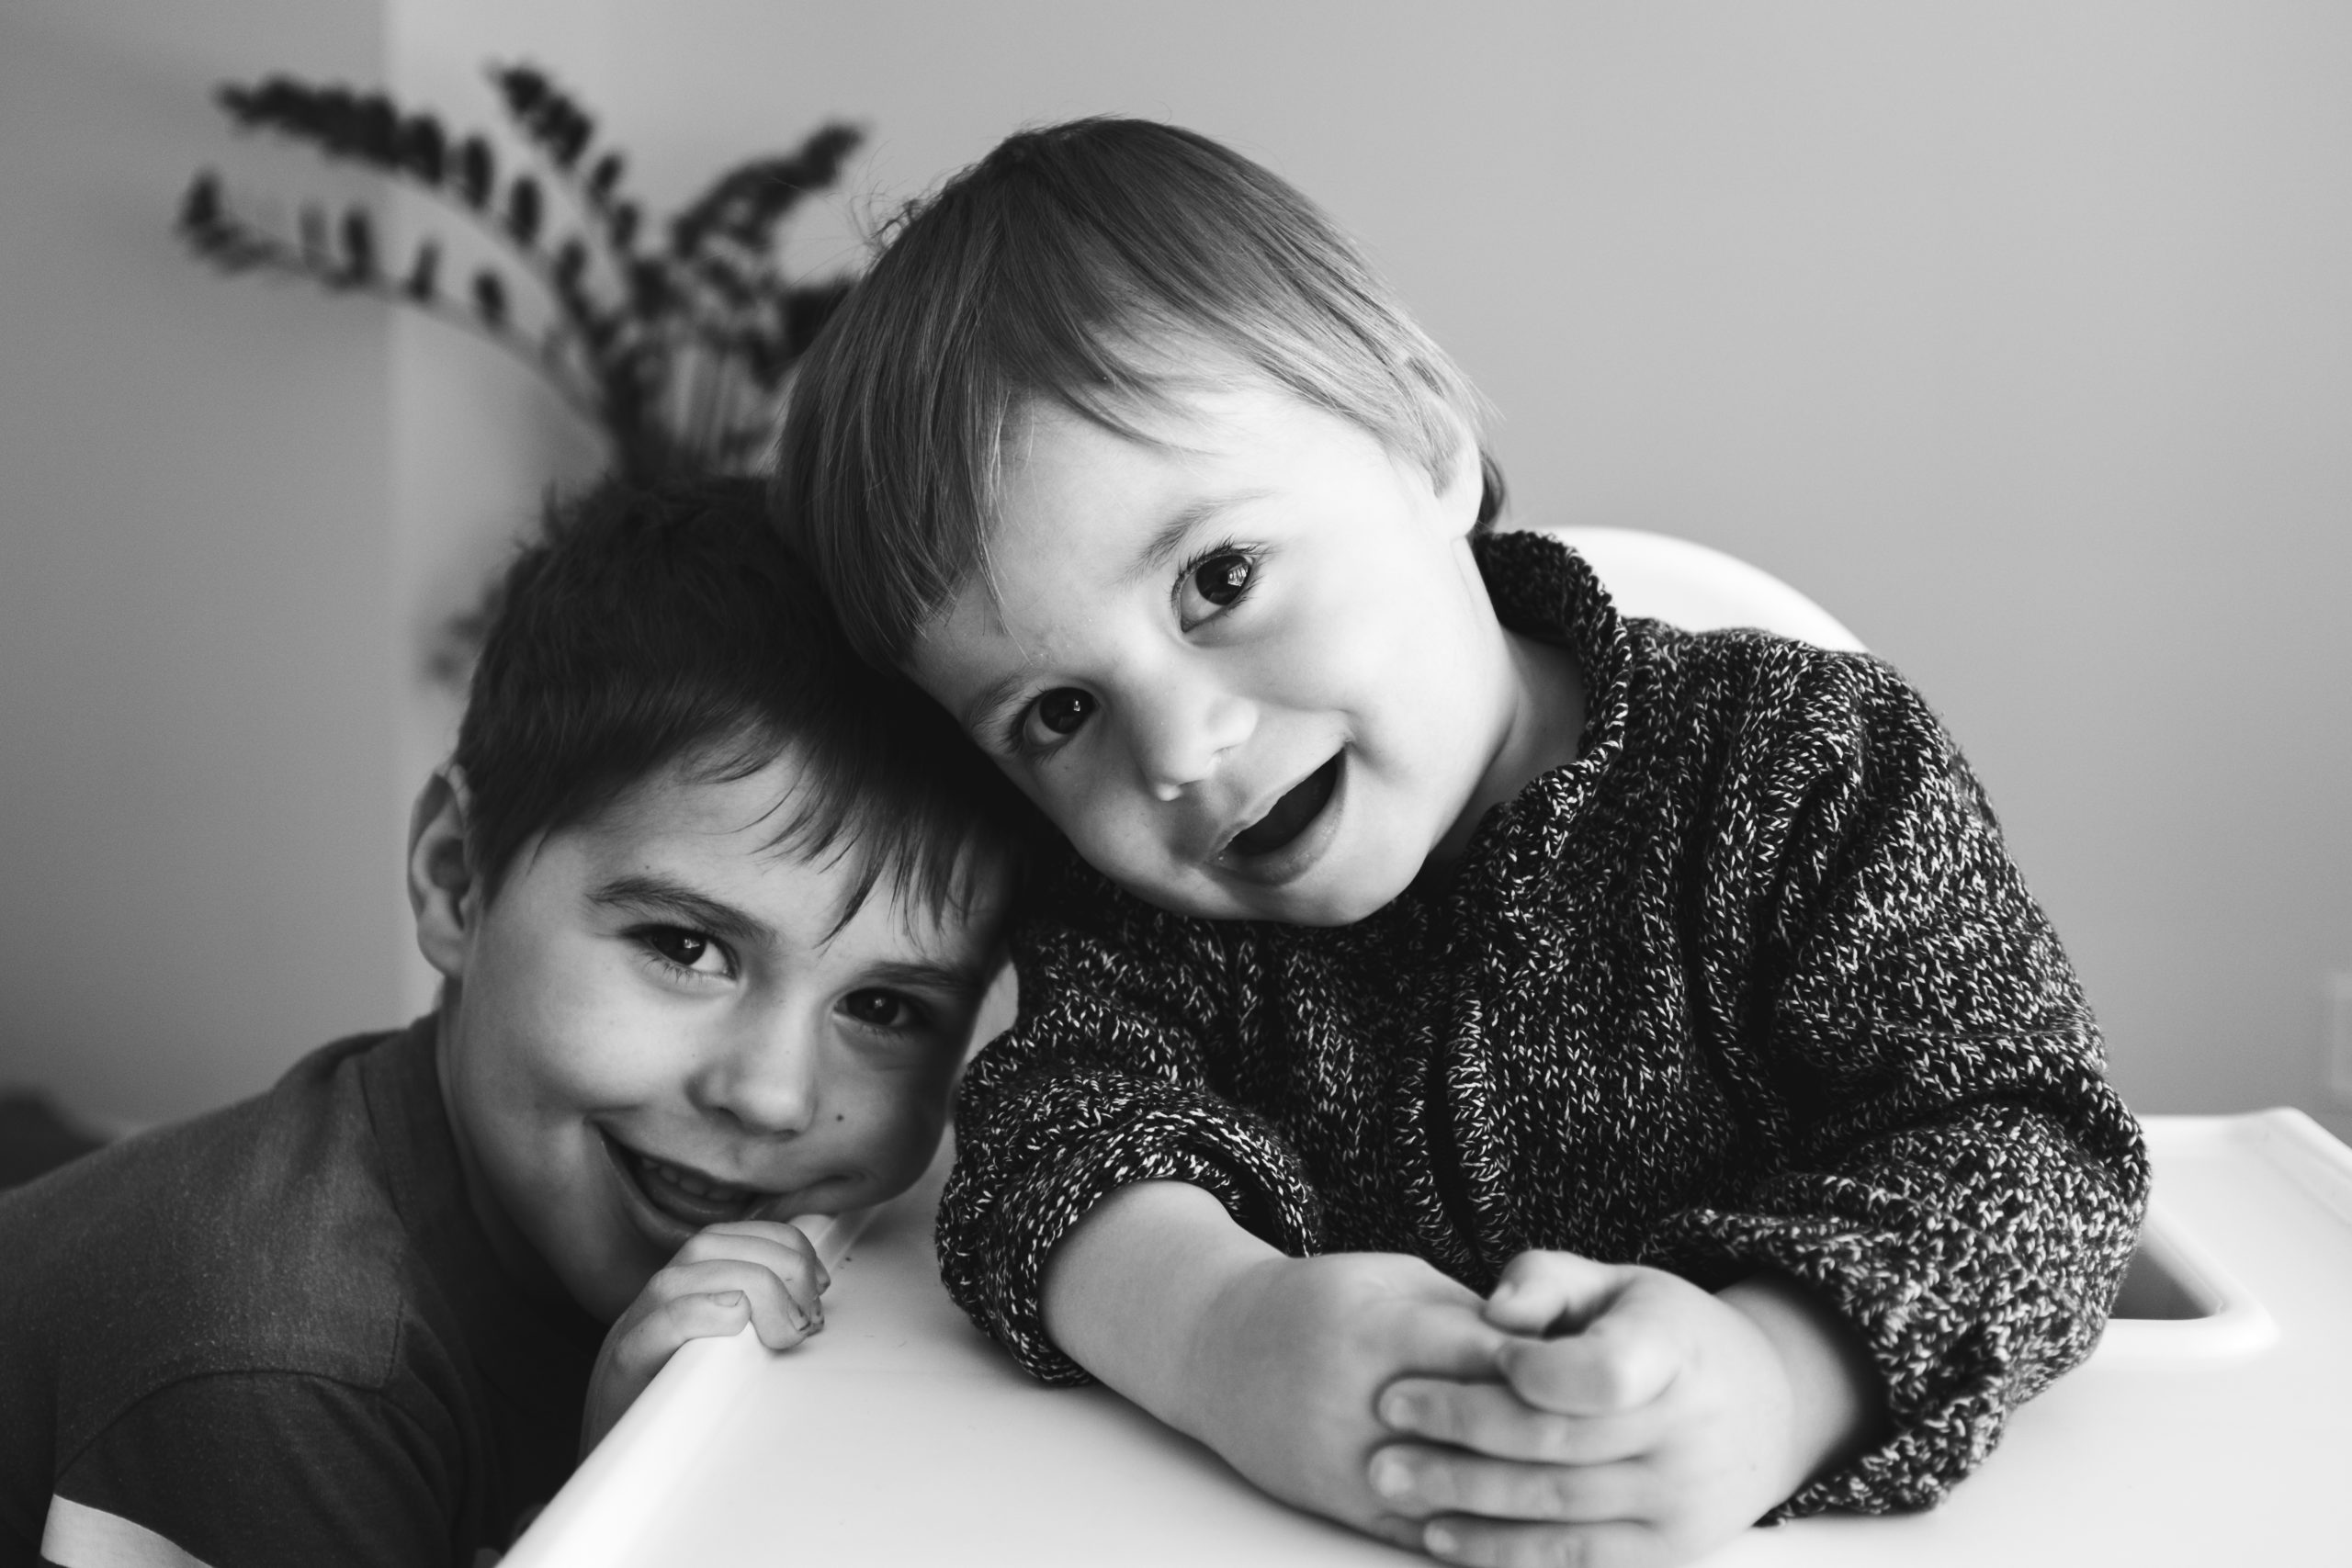 Two brothers smiling at the camera in black and white